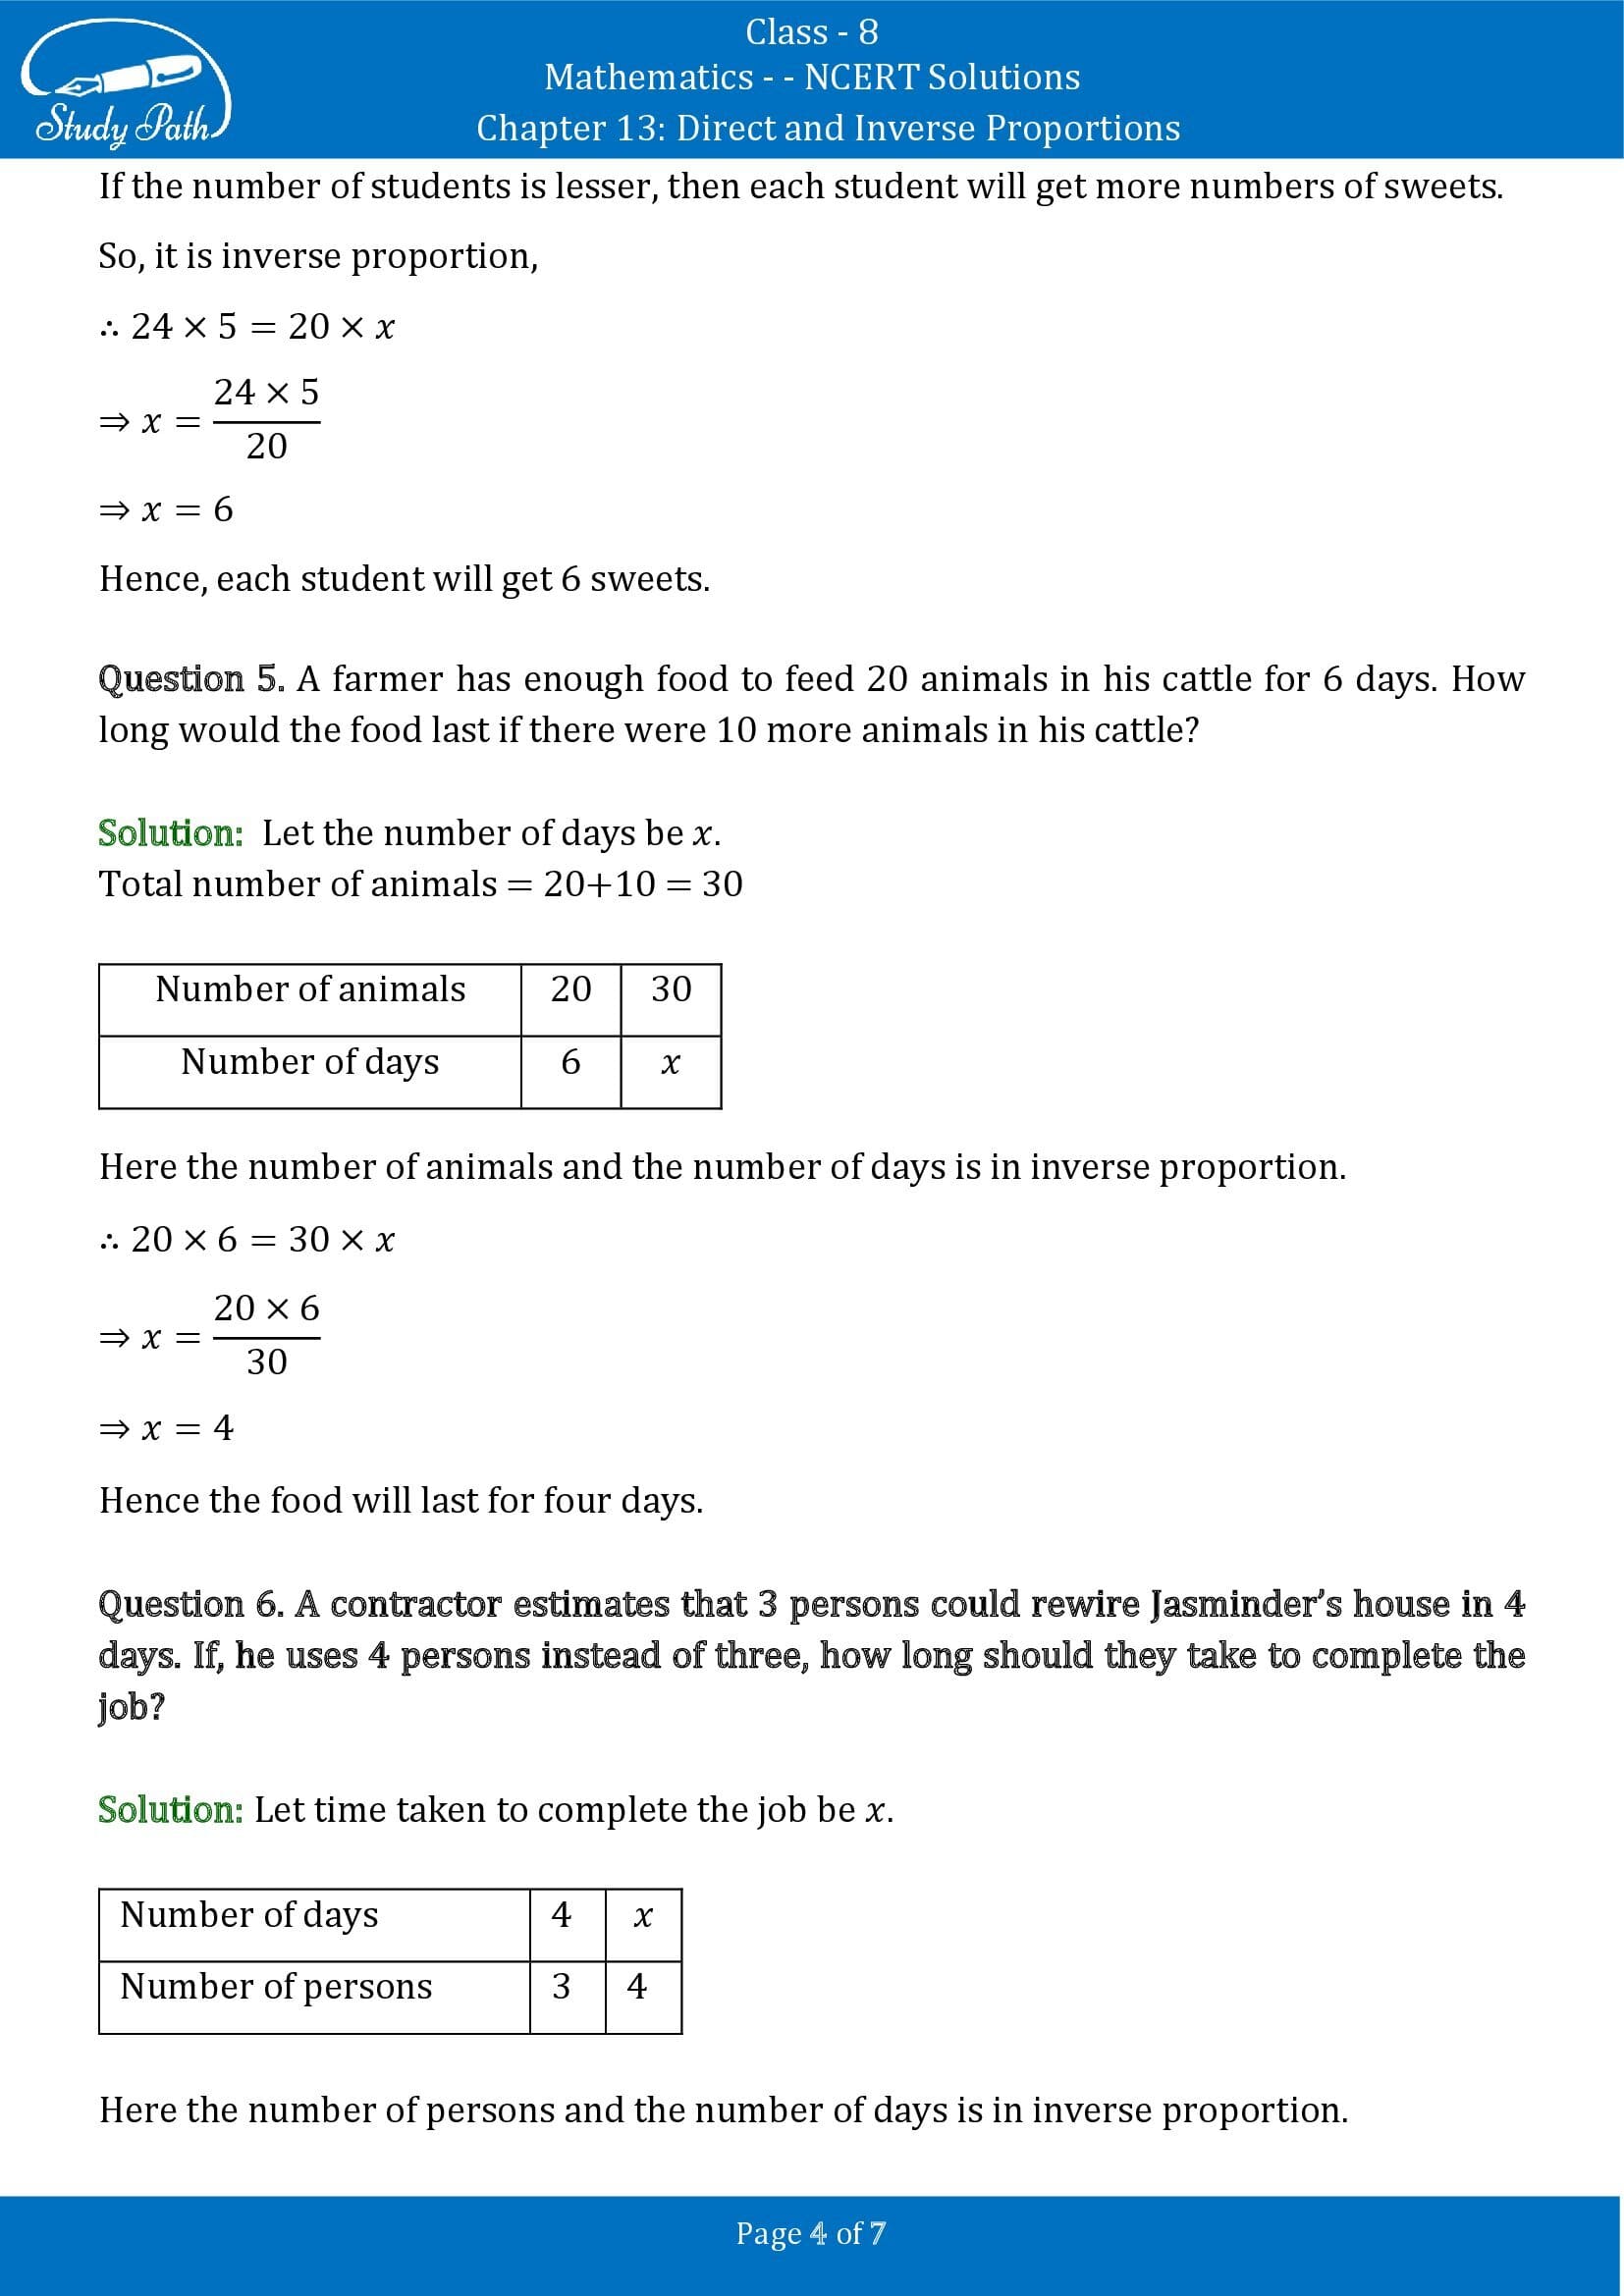 NCERT Solutions for Class 8 Maths Chapter 13 Direct and Inverse Proportions Exercise 13.2 00004